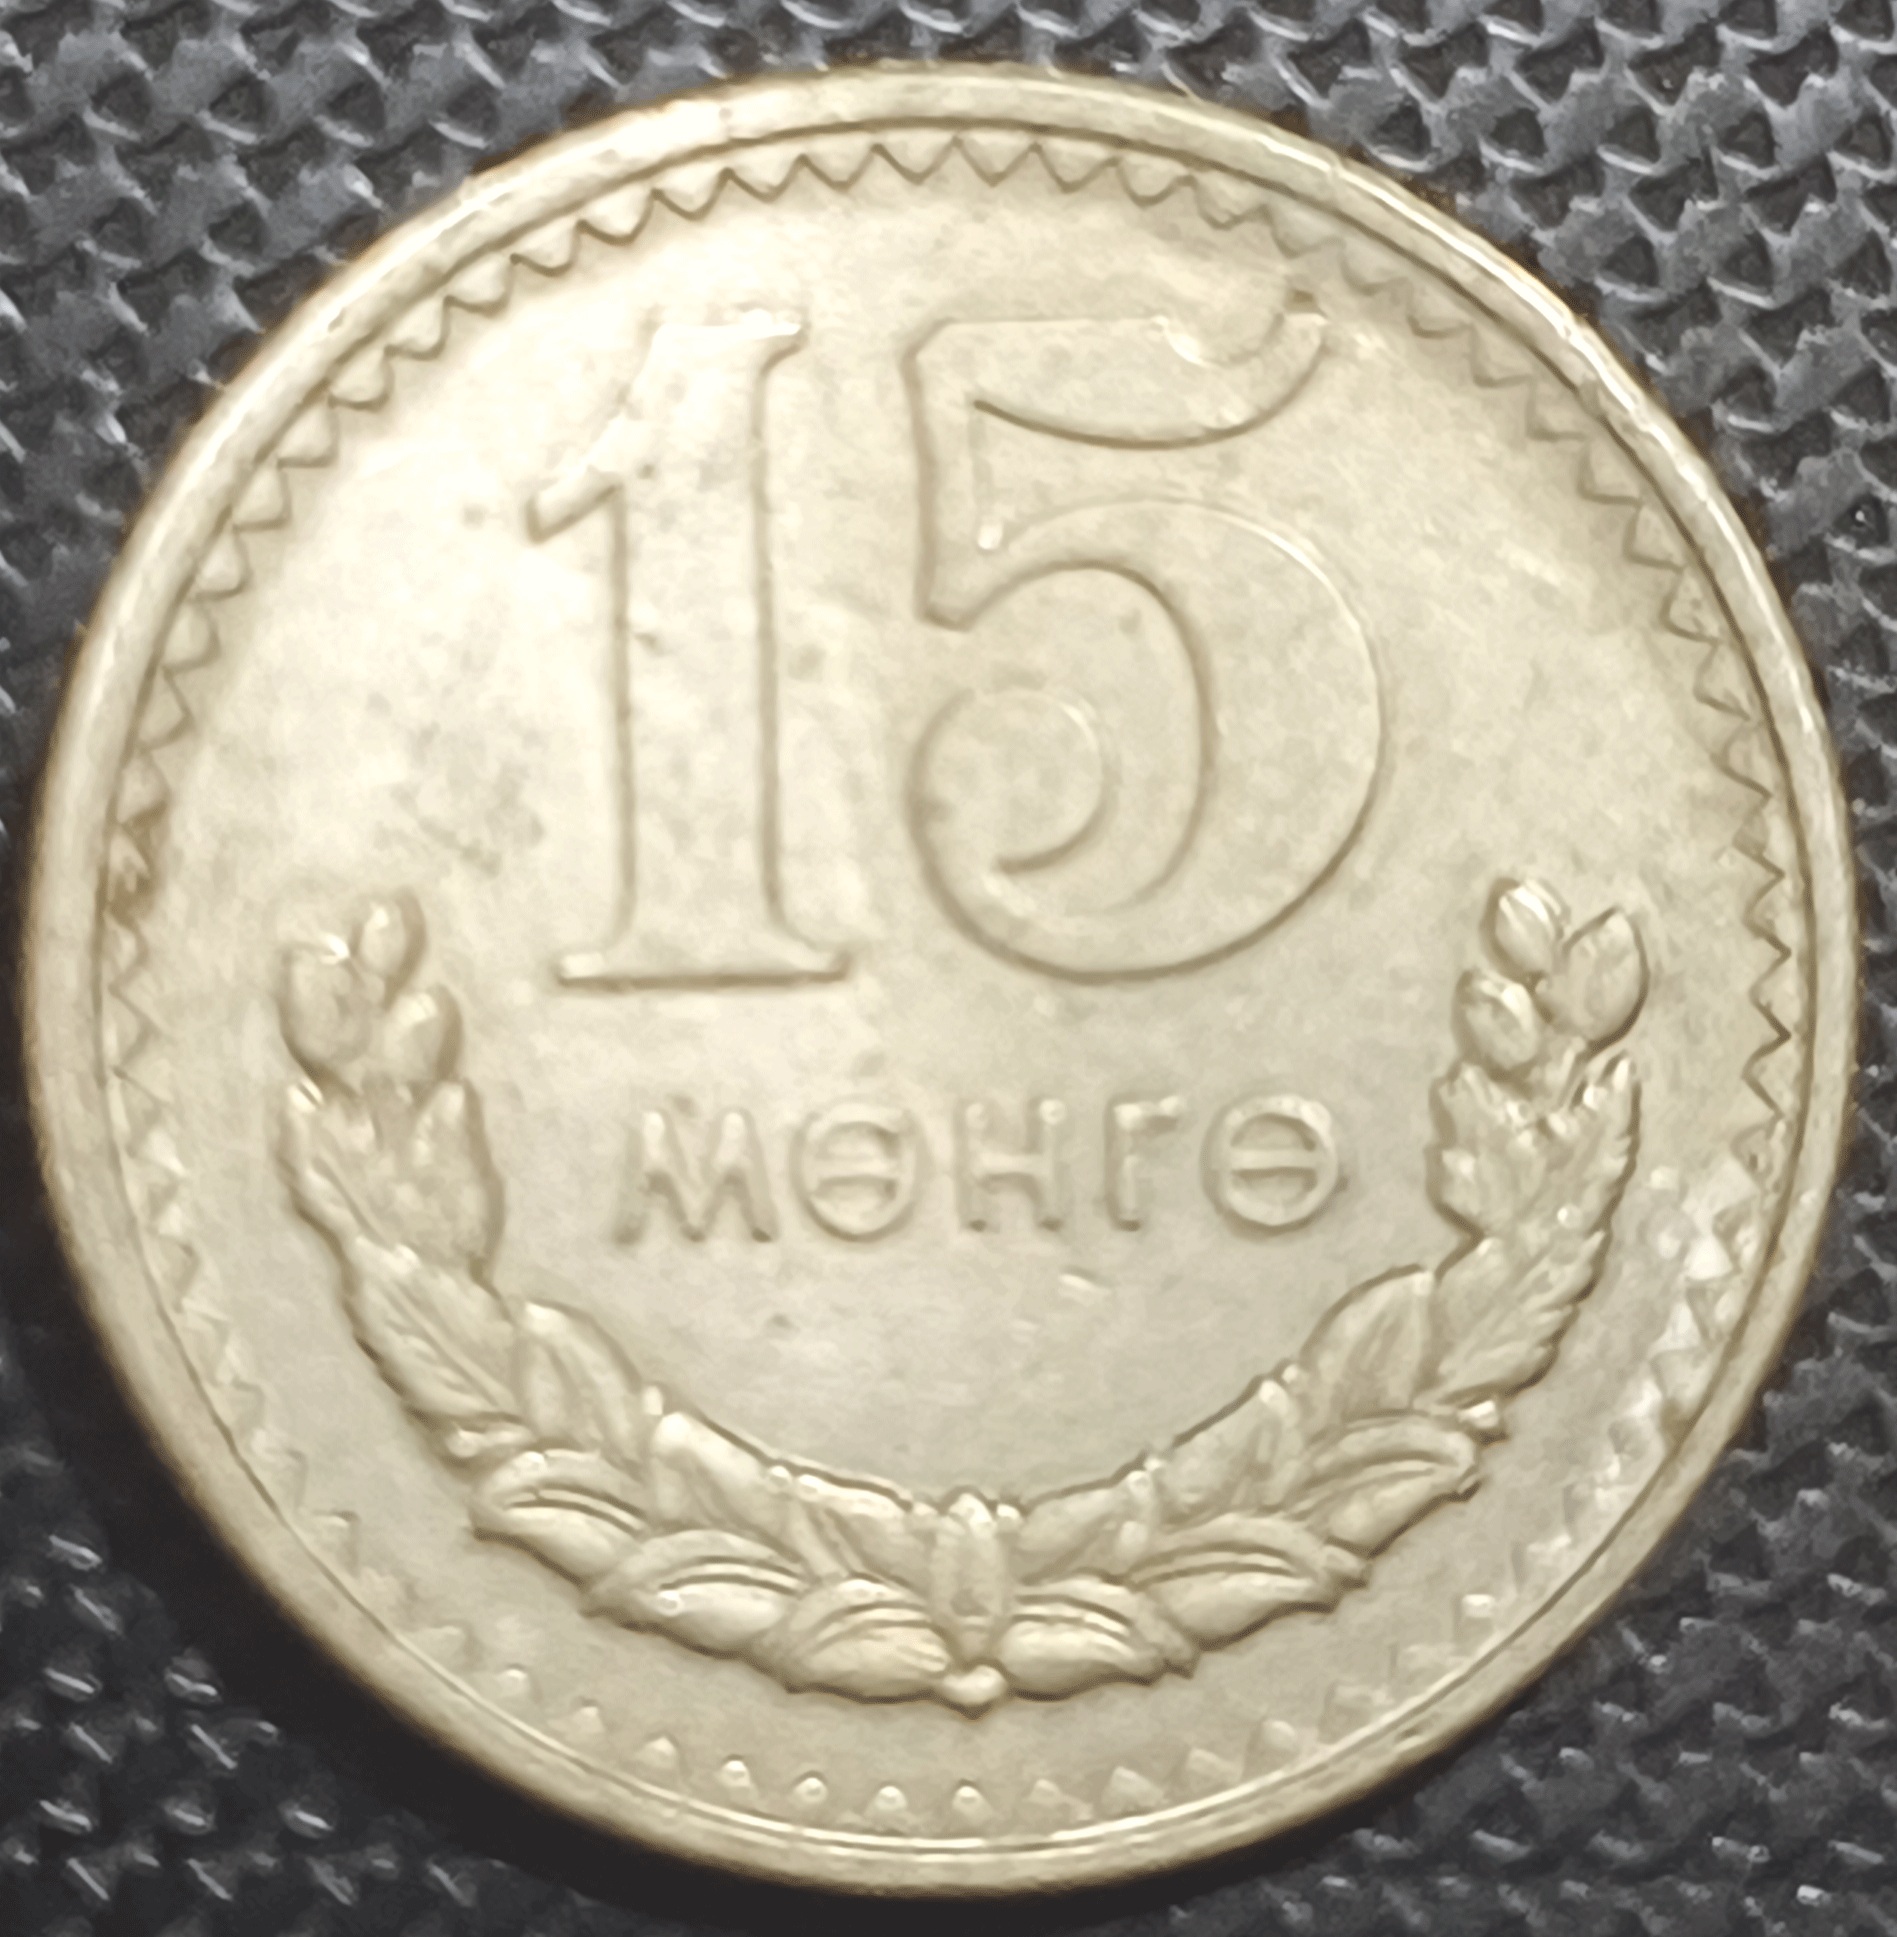 Mongolia rare coins for collectors and other buyers ~ MegaMinistore